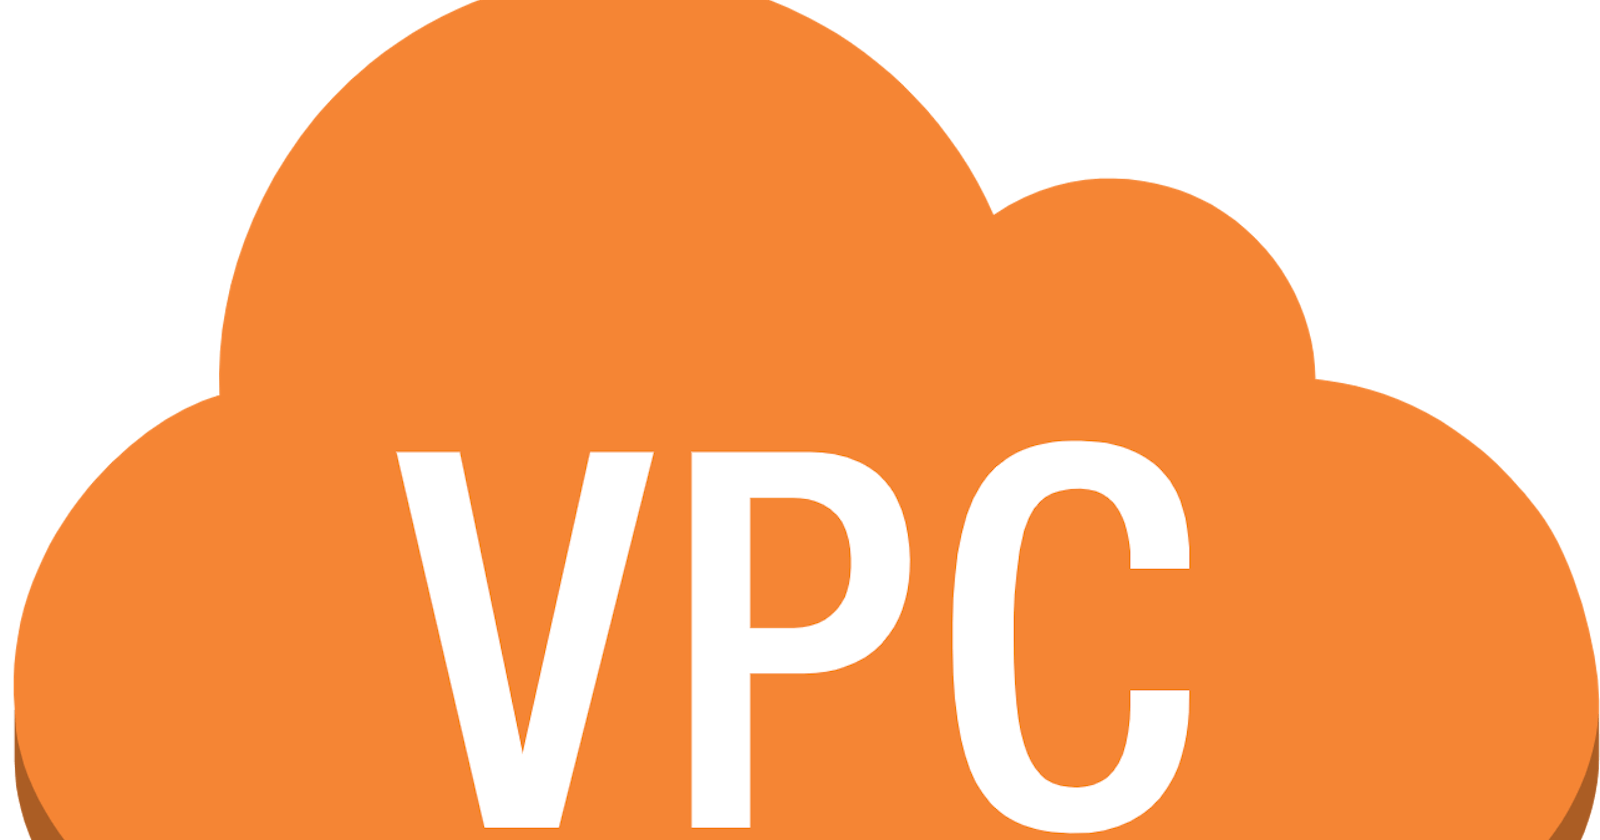 How Does The AWS VPC Work?